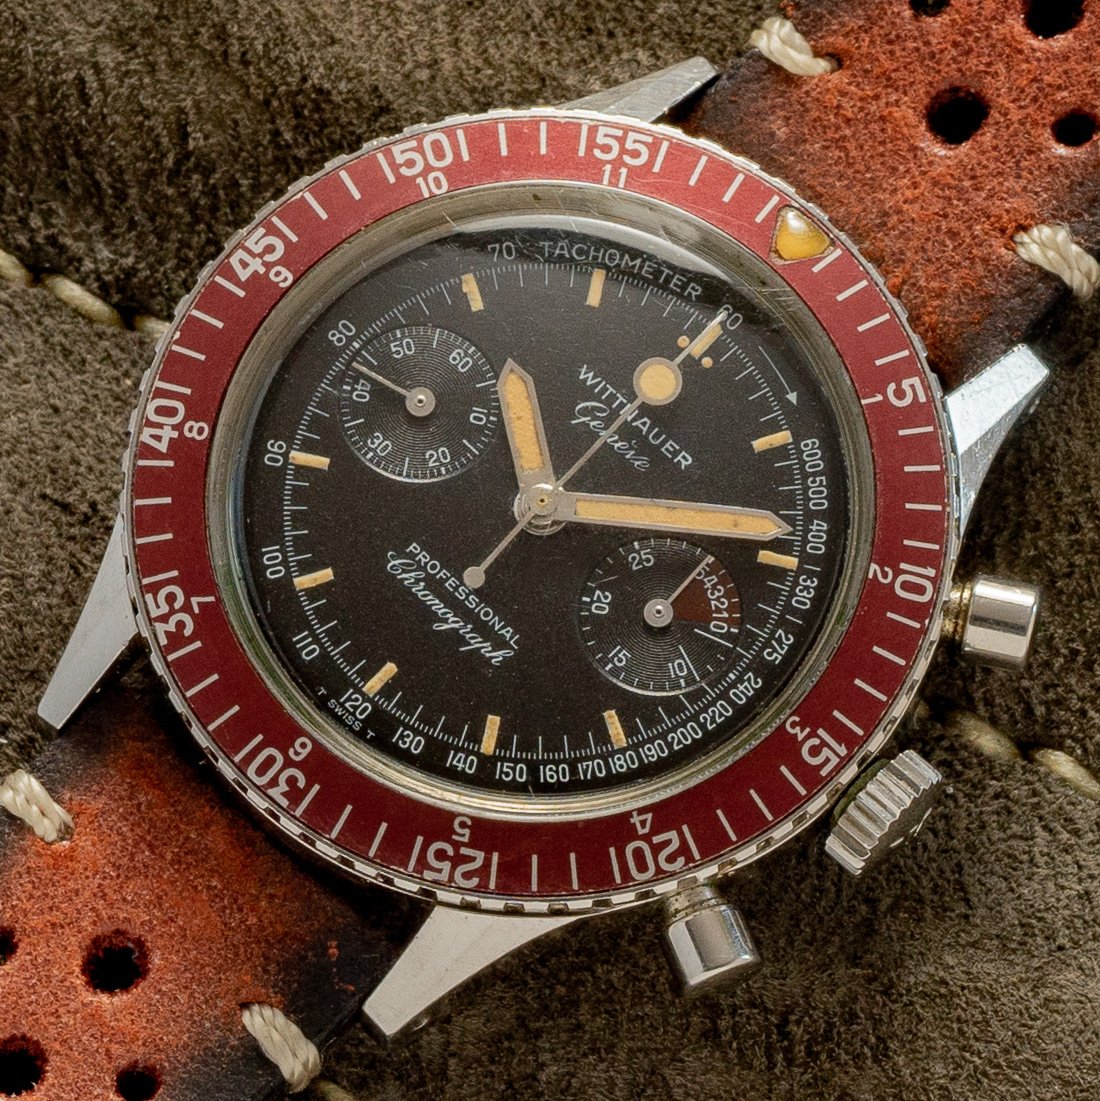 Wittnauer 7004A Professional Chronograph w/Boxes - 1960s